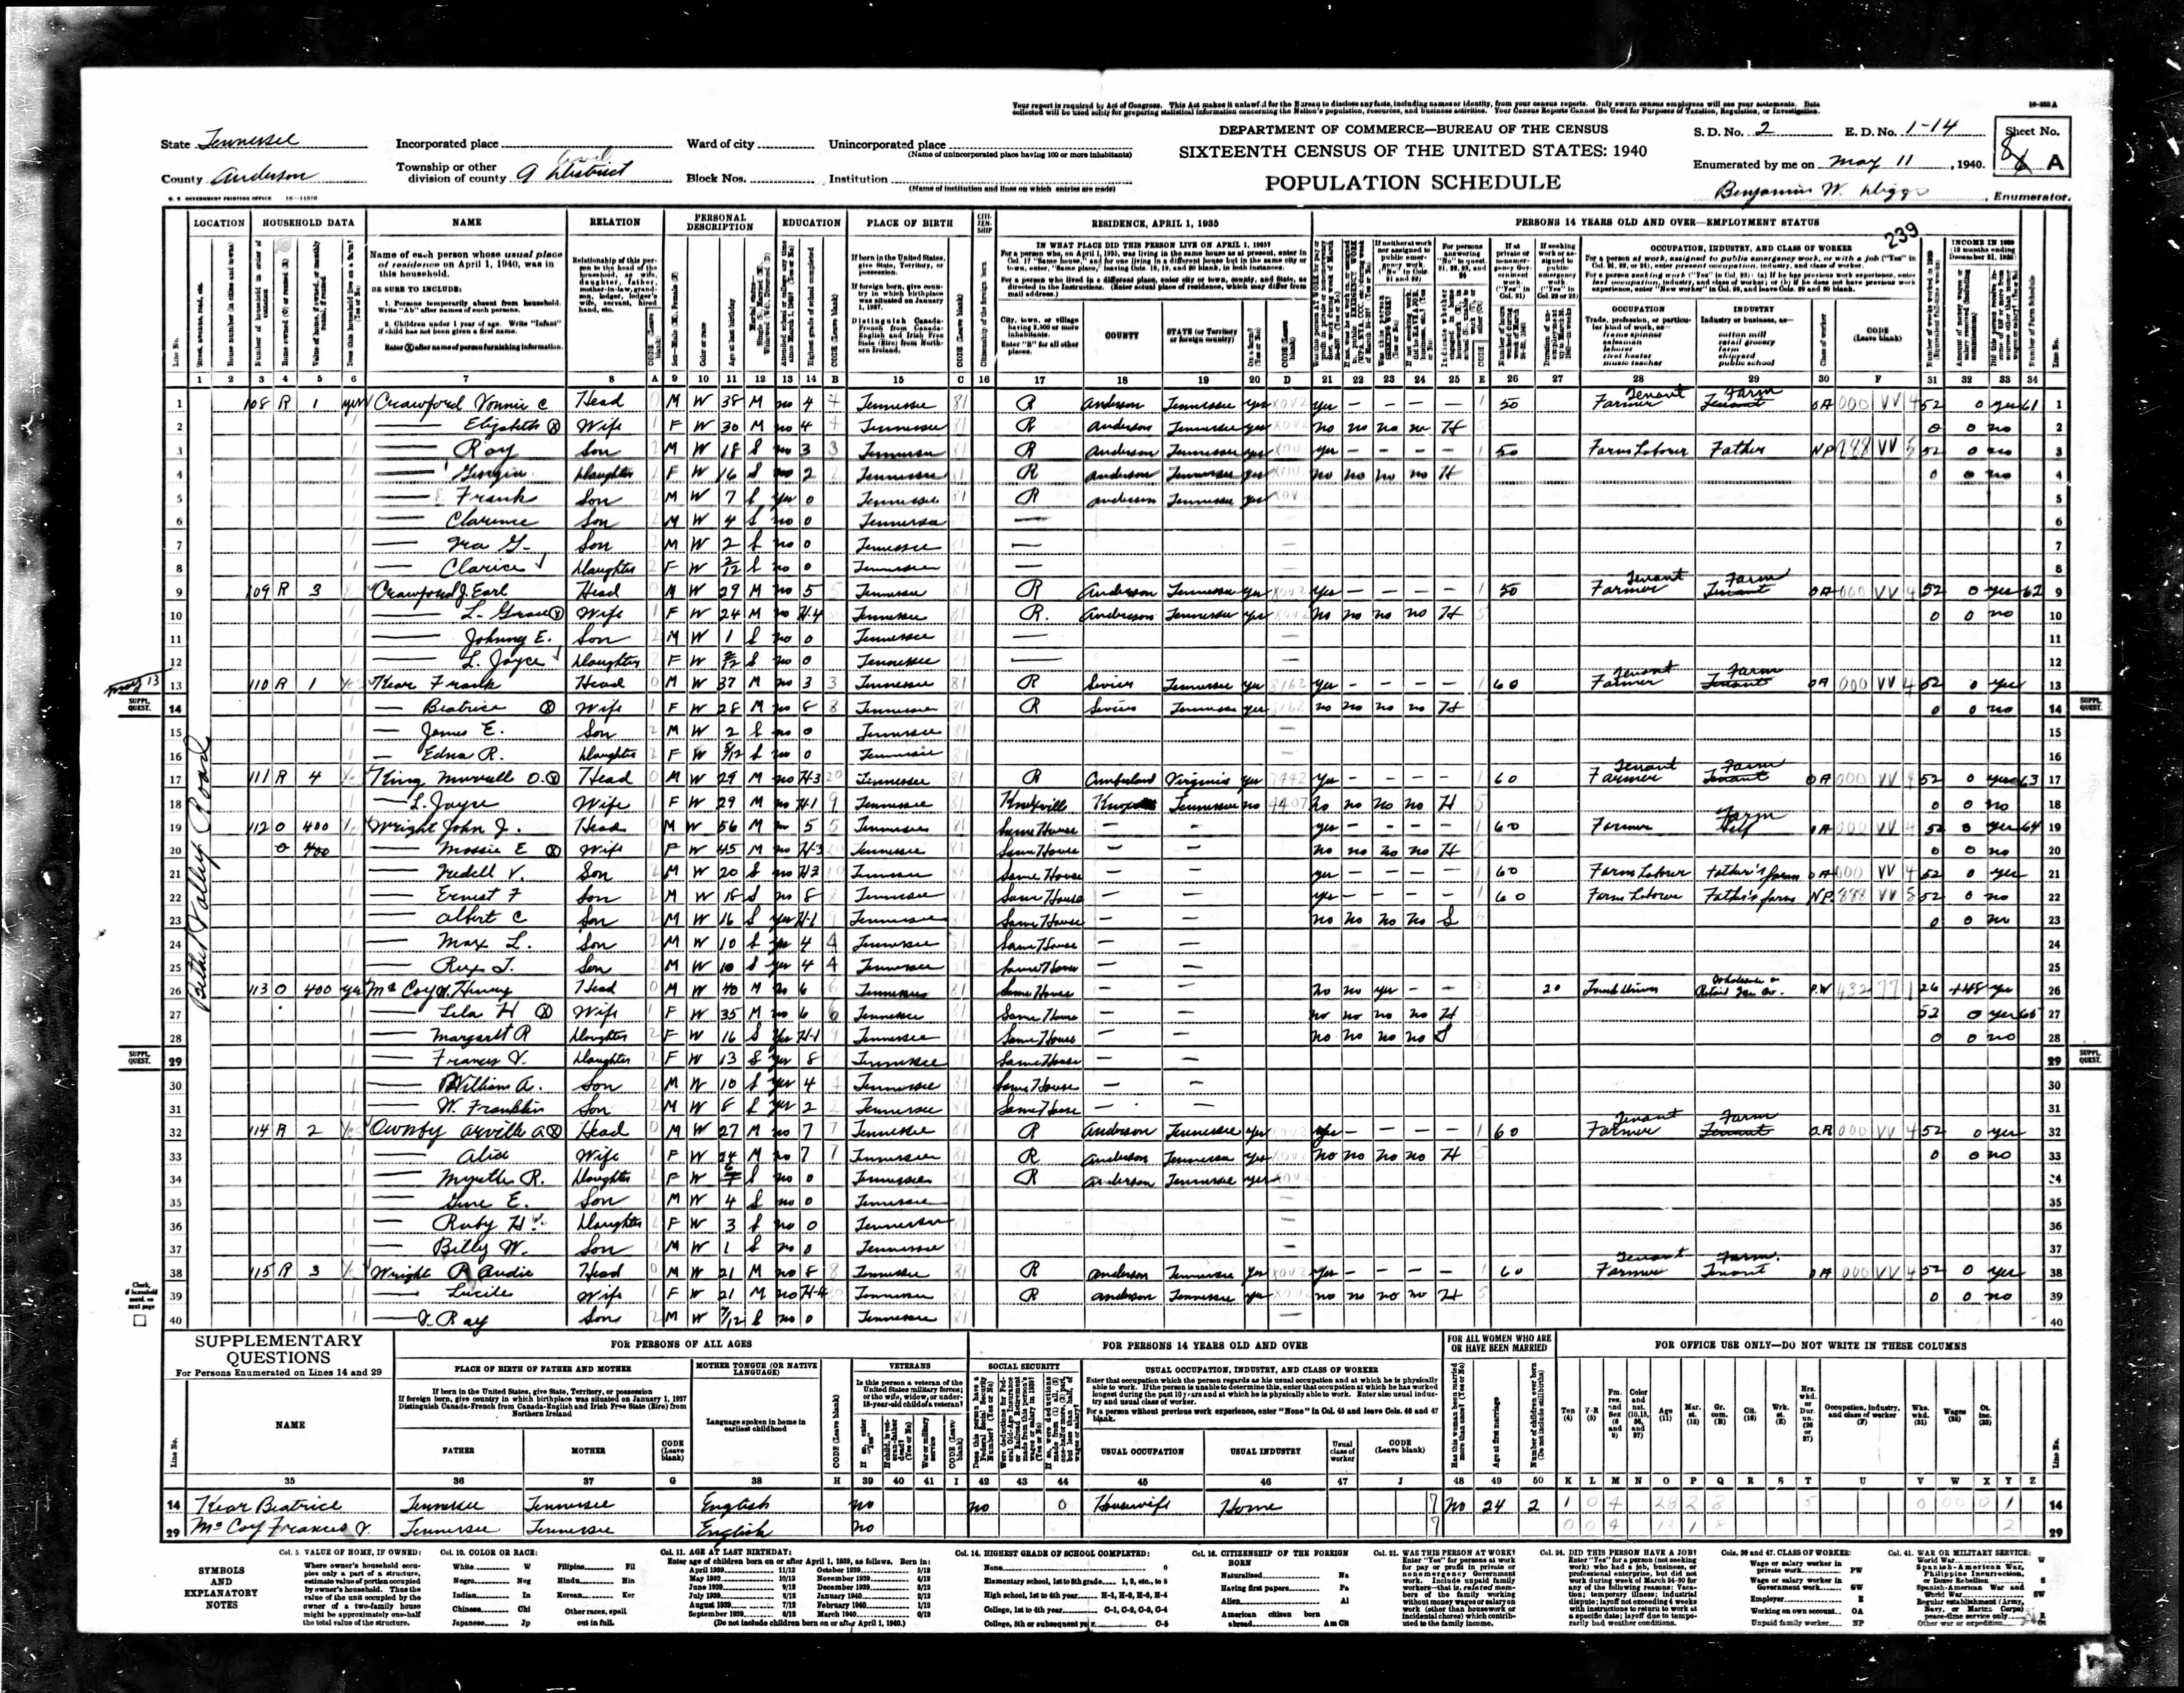 1940 U.S. Census, Anderson County, Tennessee, Dist. 9, page 239a